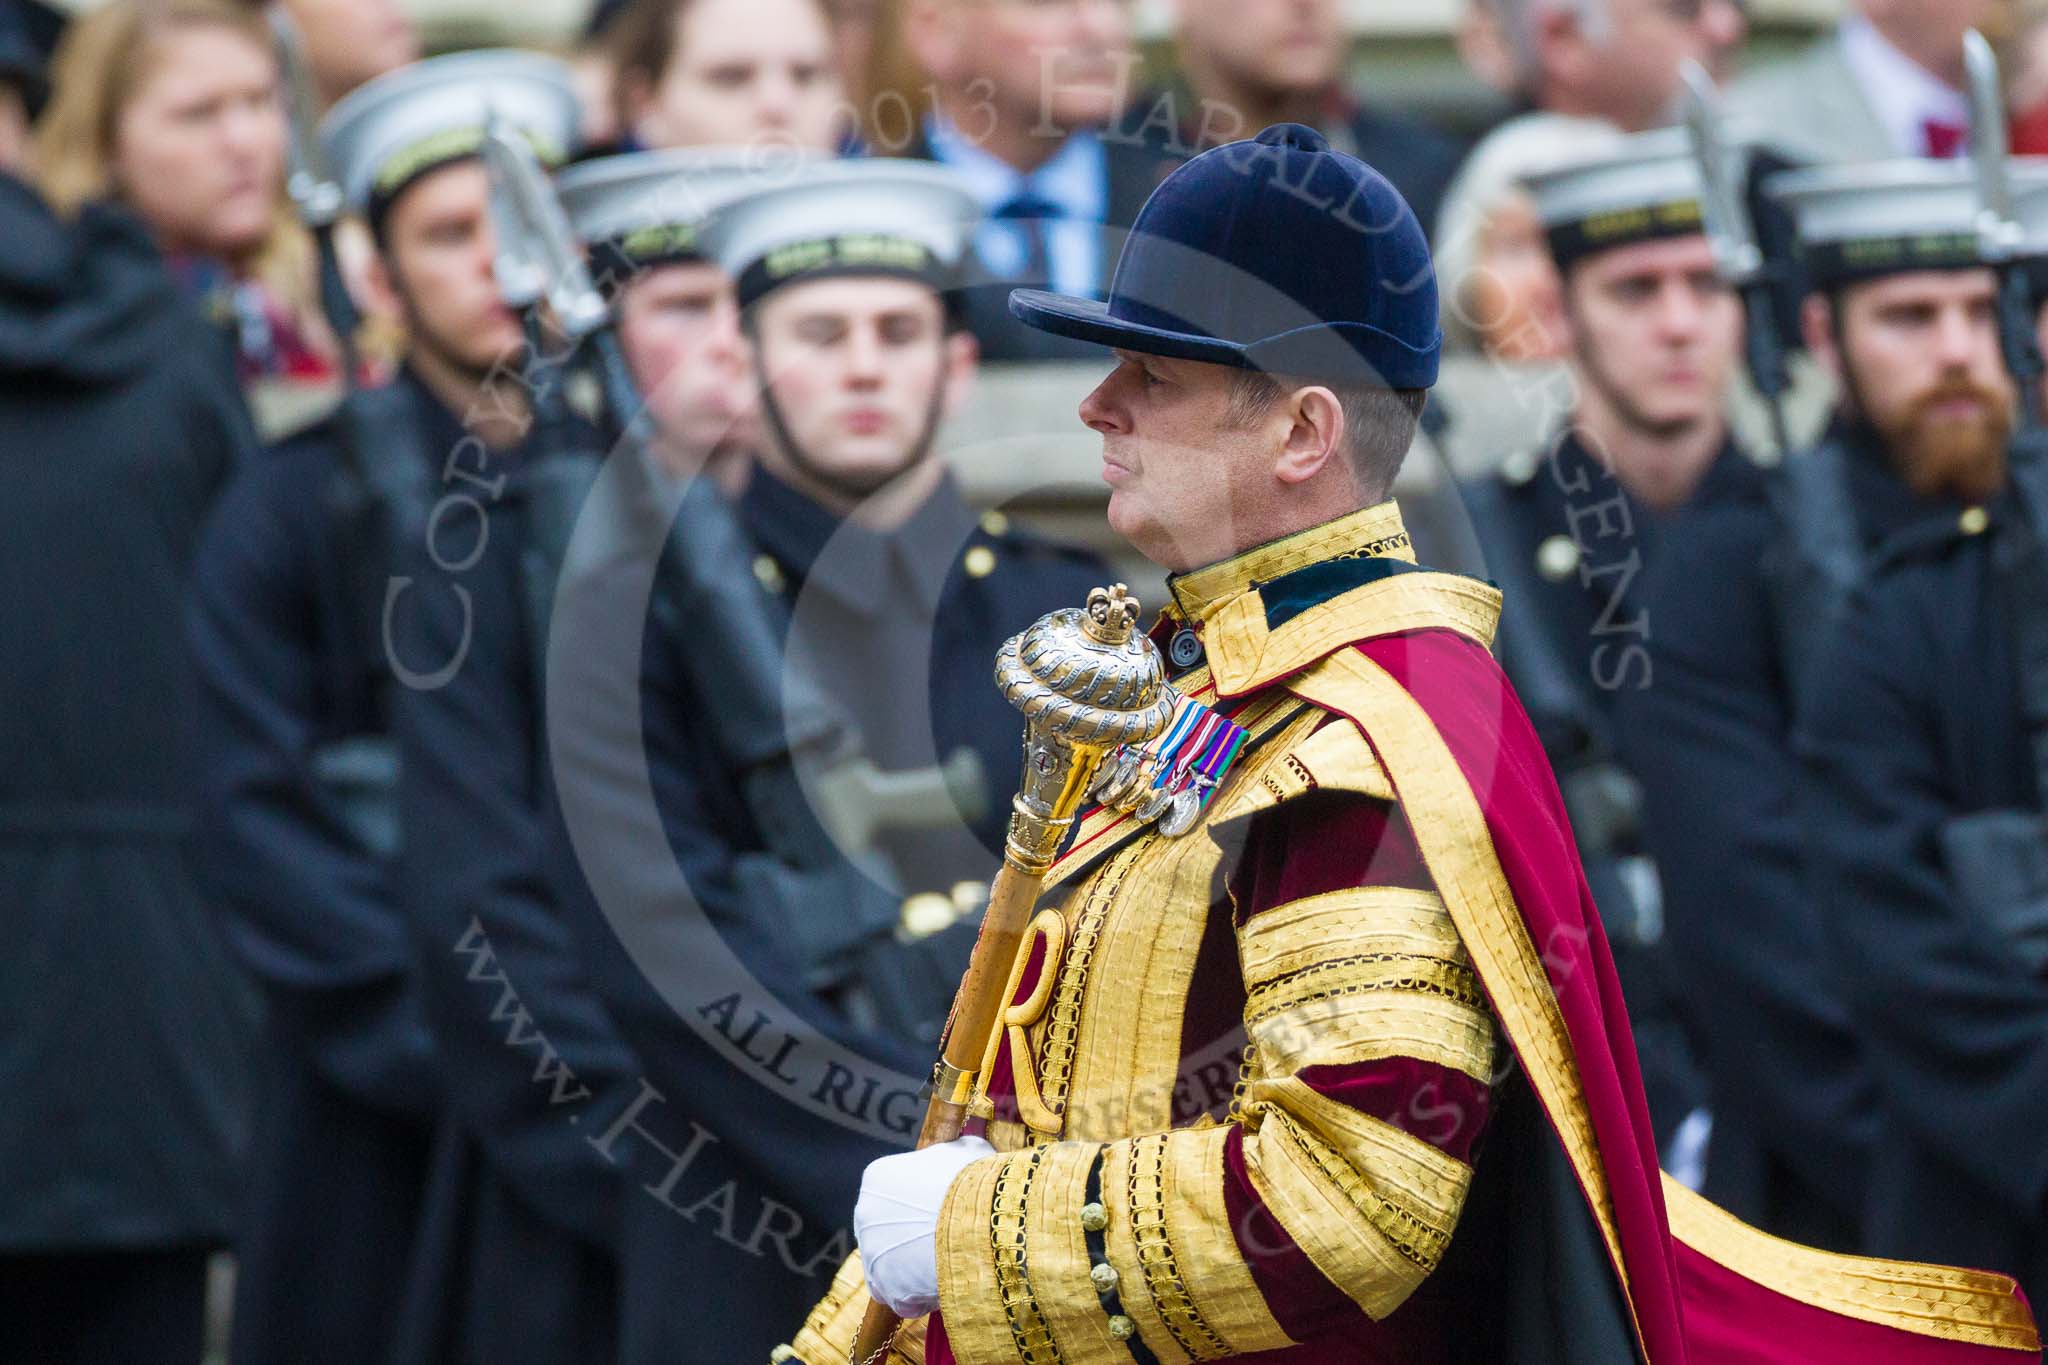 Remembrance Sunday at the Cenotaph 2015: Drum Major Tony Taylor, No. 7 Company Coldstream Guards, leading his band to a new position to make space for the March Past.
Cenotaph, Whitehall, London SW1,
London,
Greater London,
United Kingdom,
on 08 November 2015 at 11:35, image #10